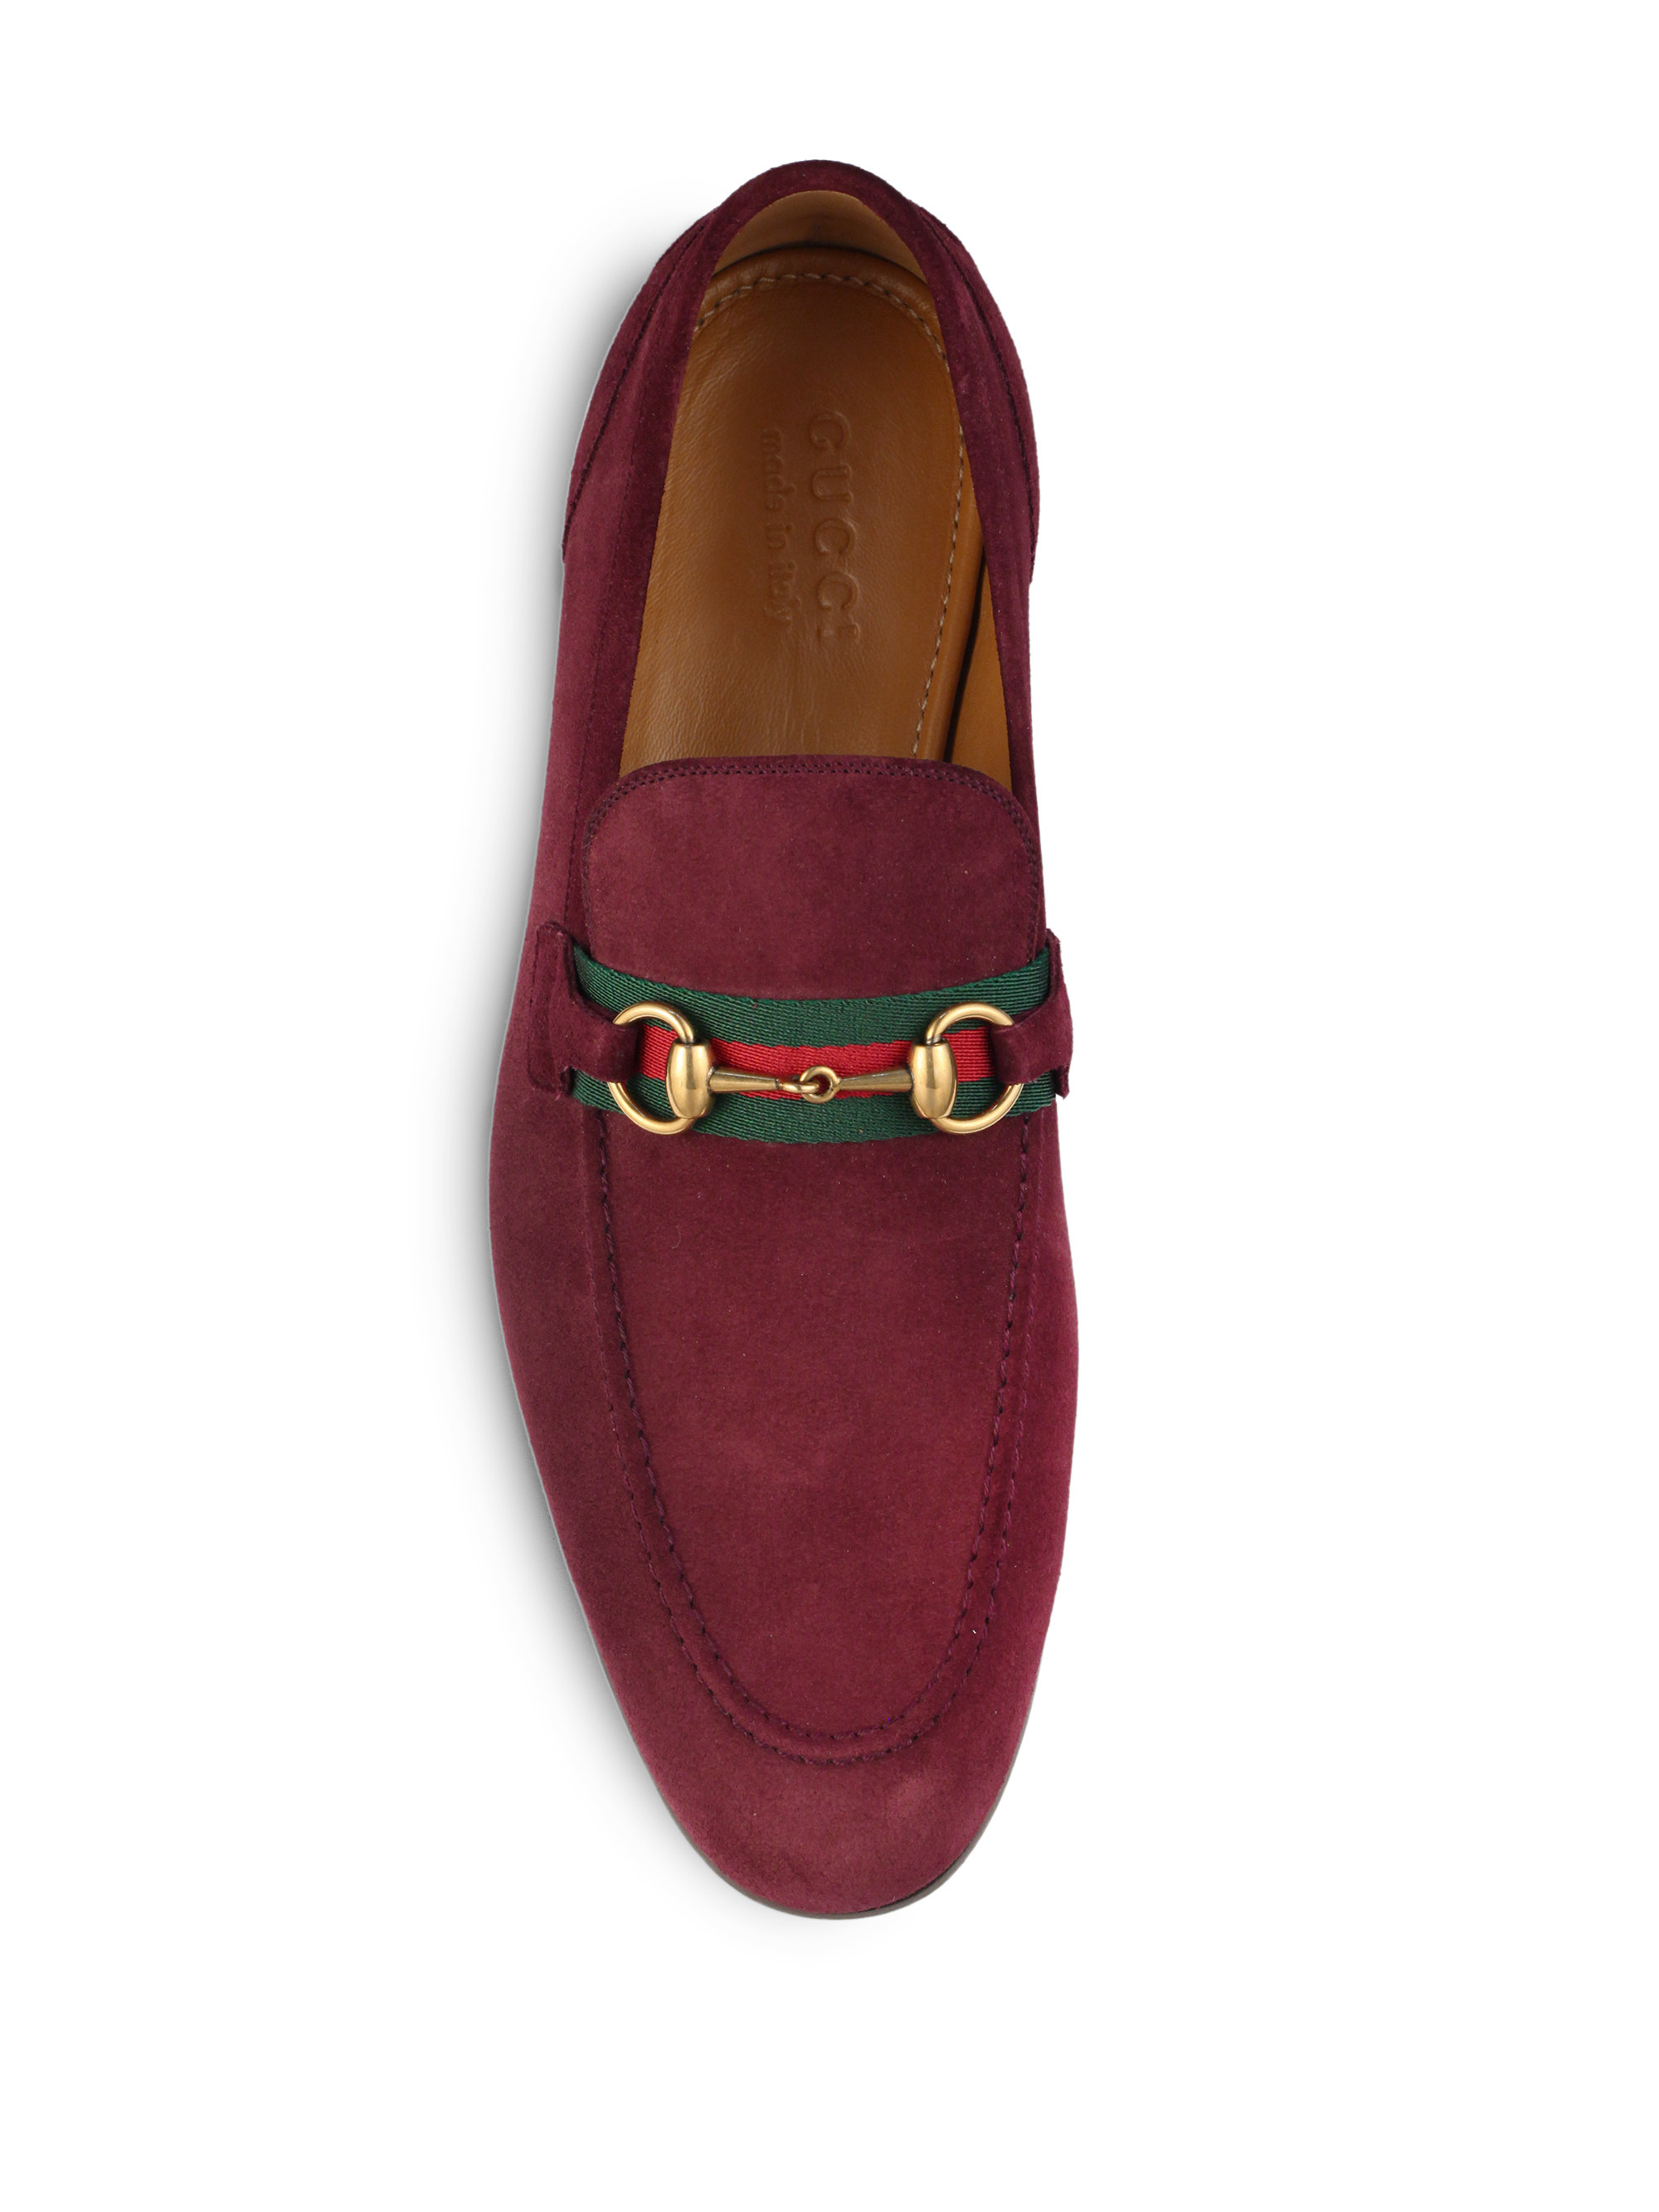 Lyst - Gucci Suede Horsebit Loafers in Red for Men